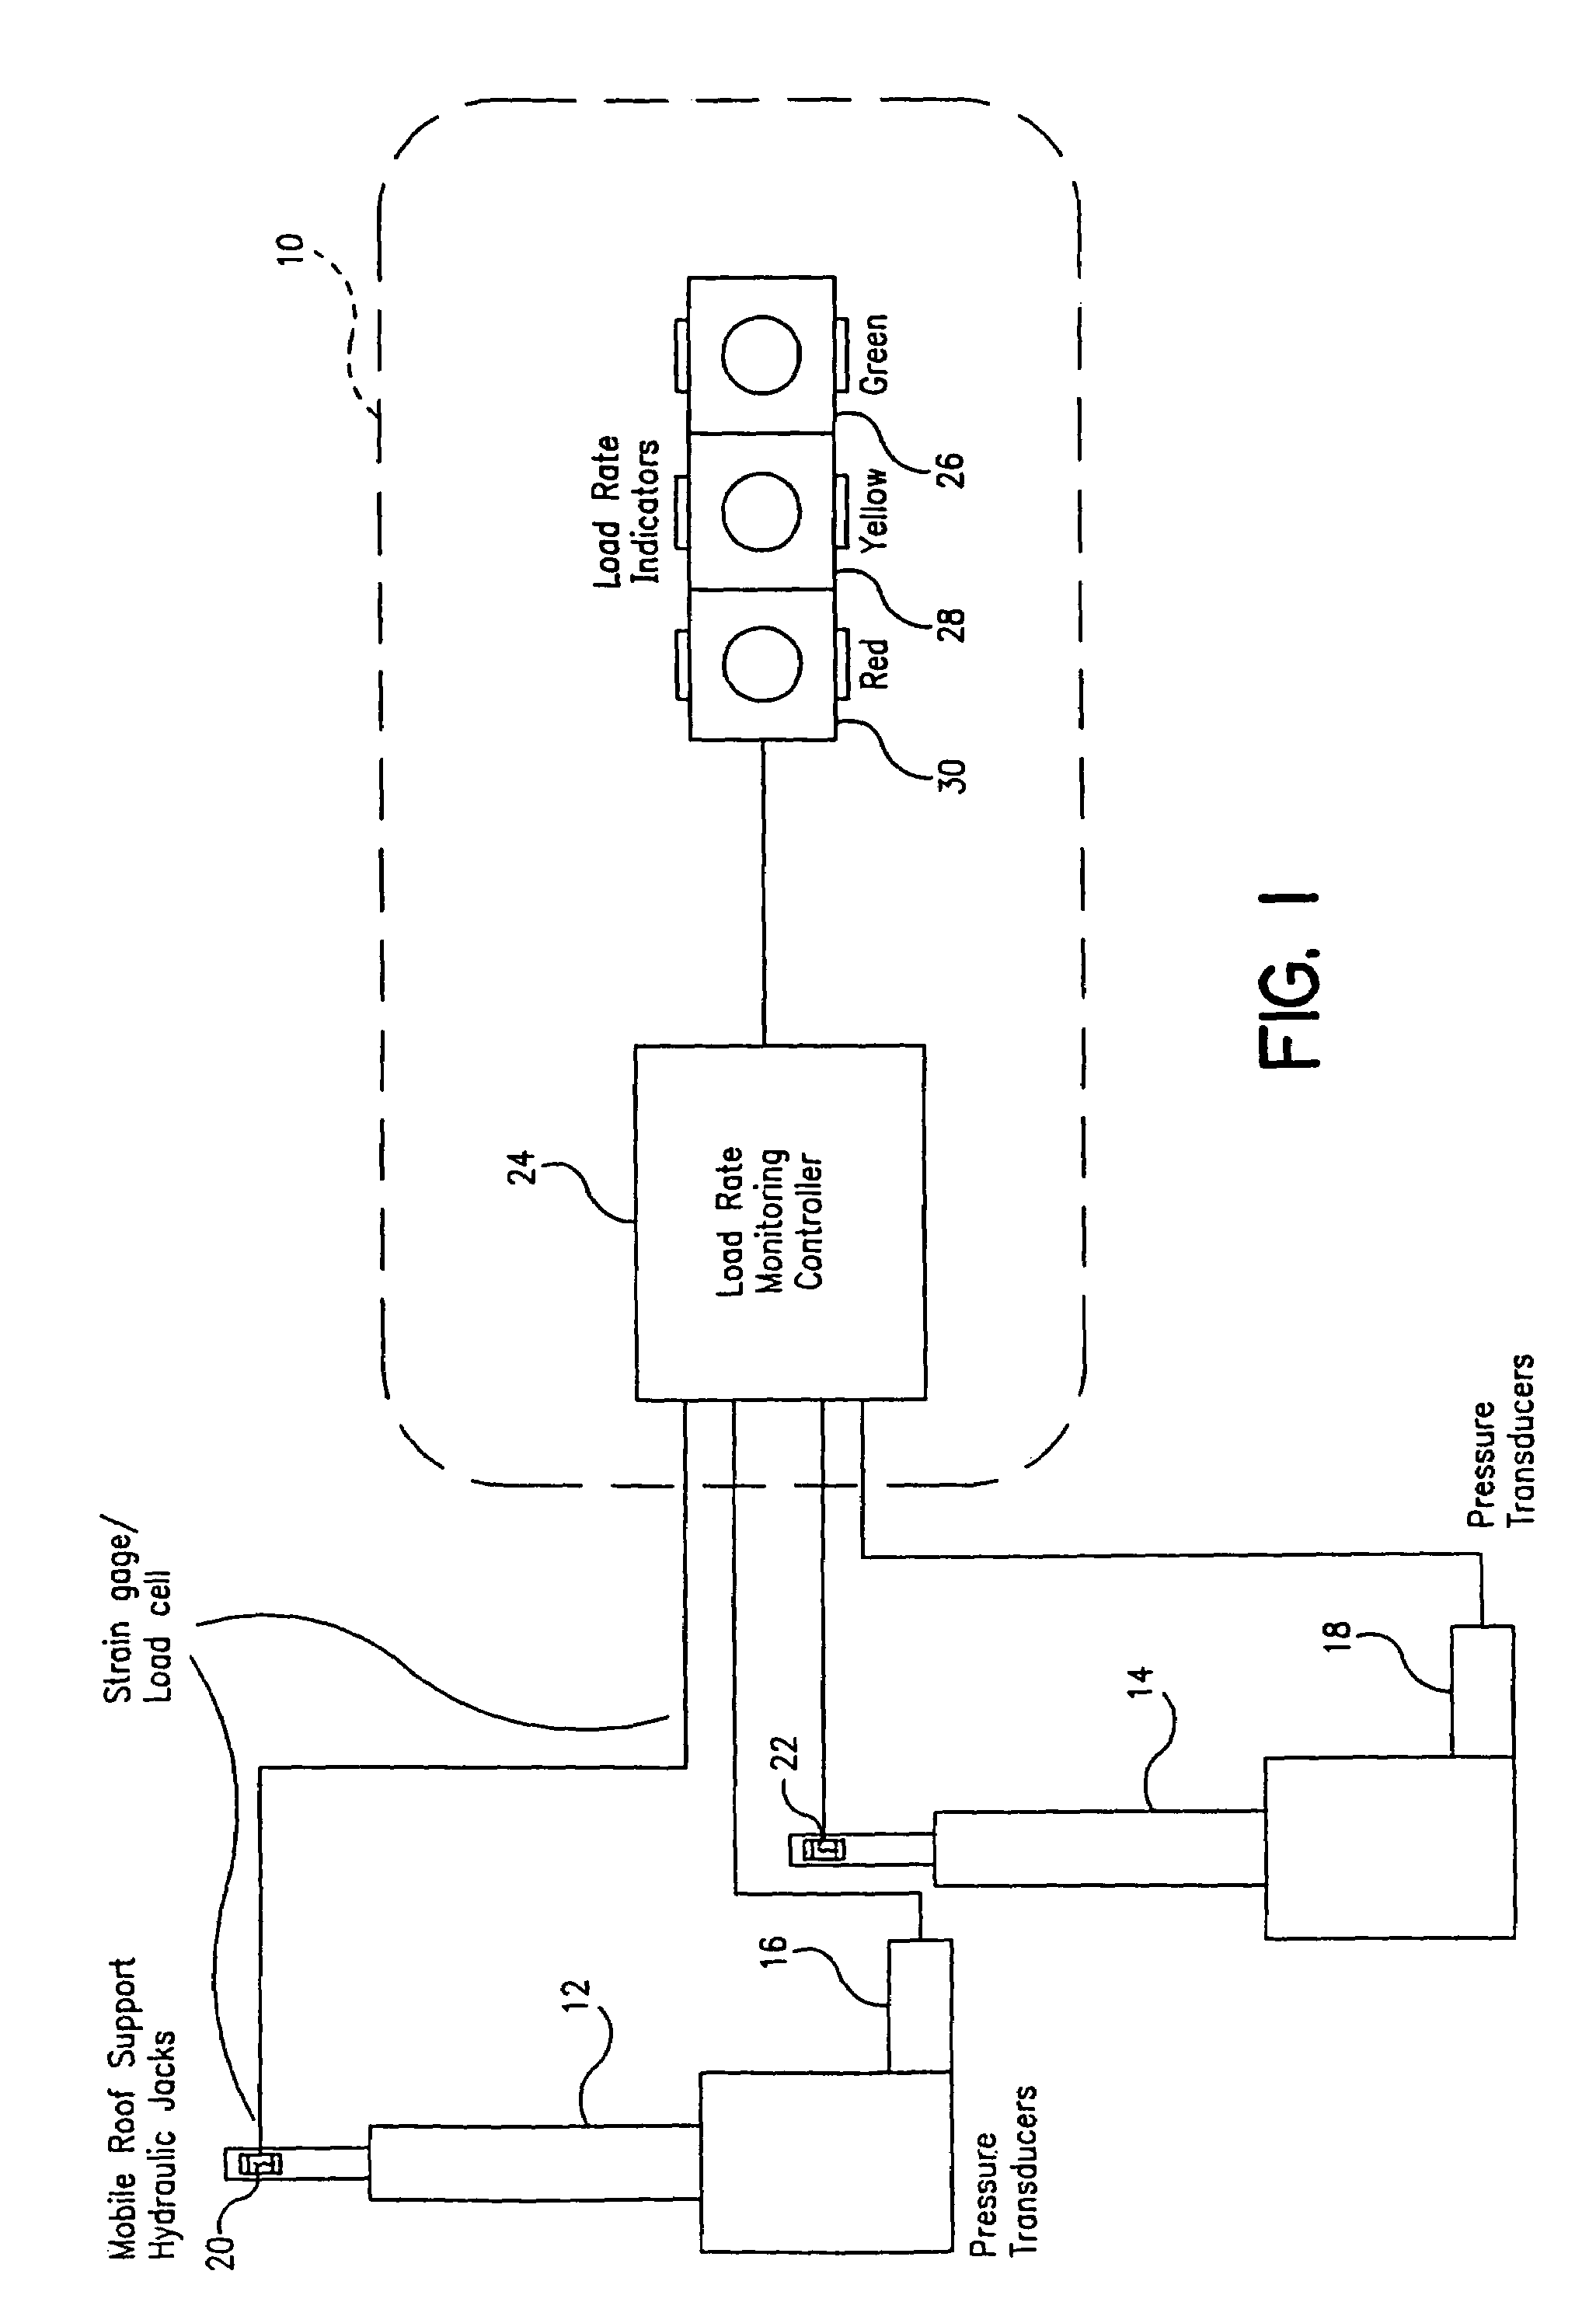 Method and apparatus for load rate monitoring